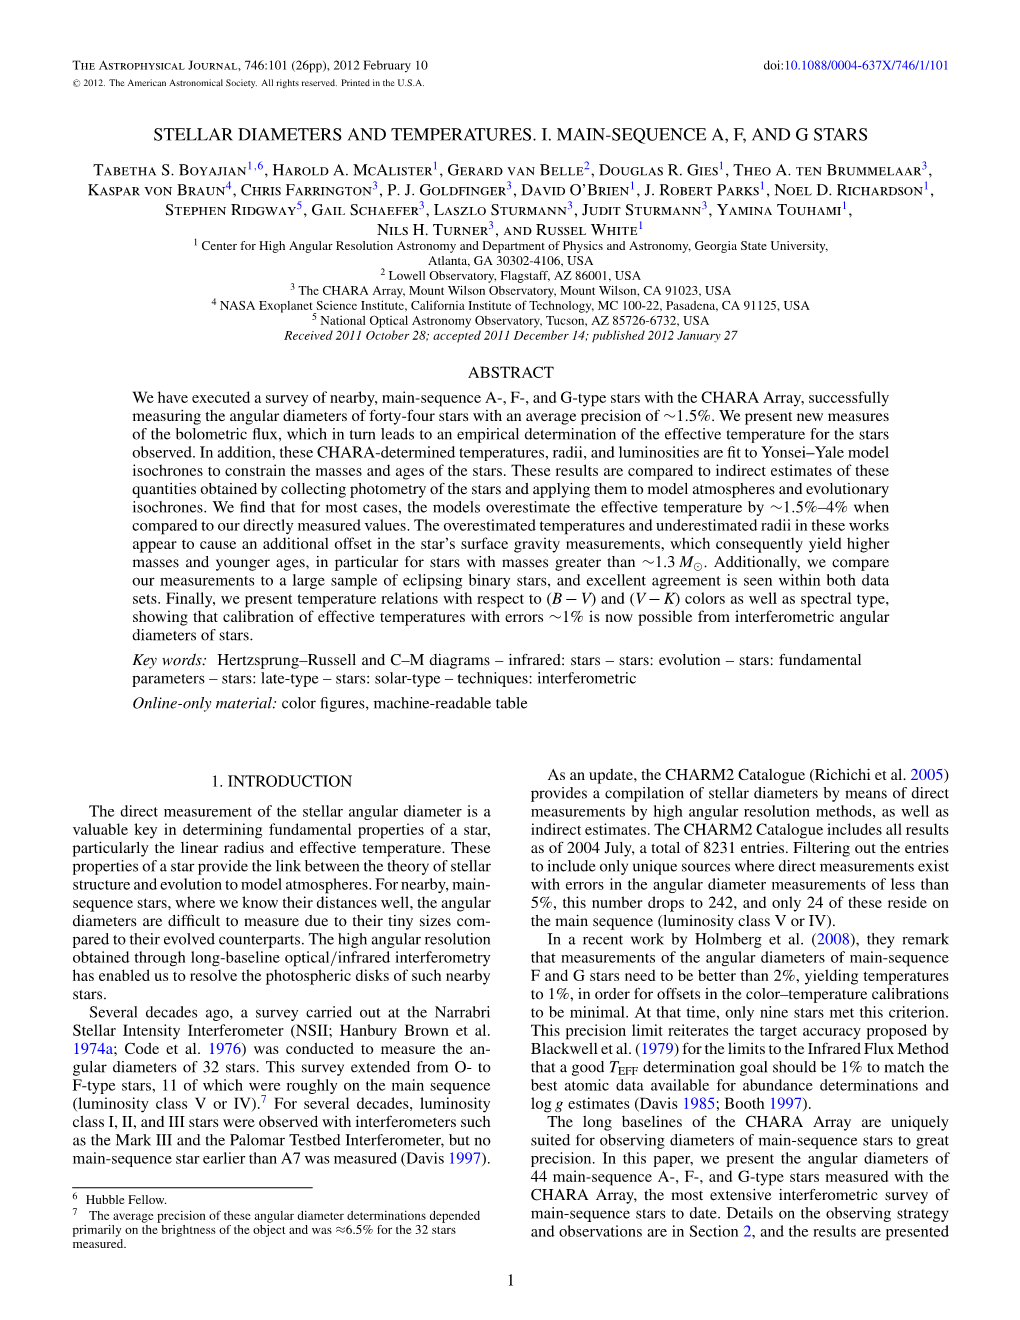 Stellar Diameters and Temperatures. I. Main-Sequence A, F, and G Stars